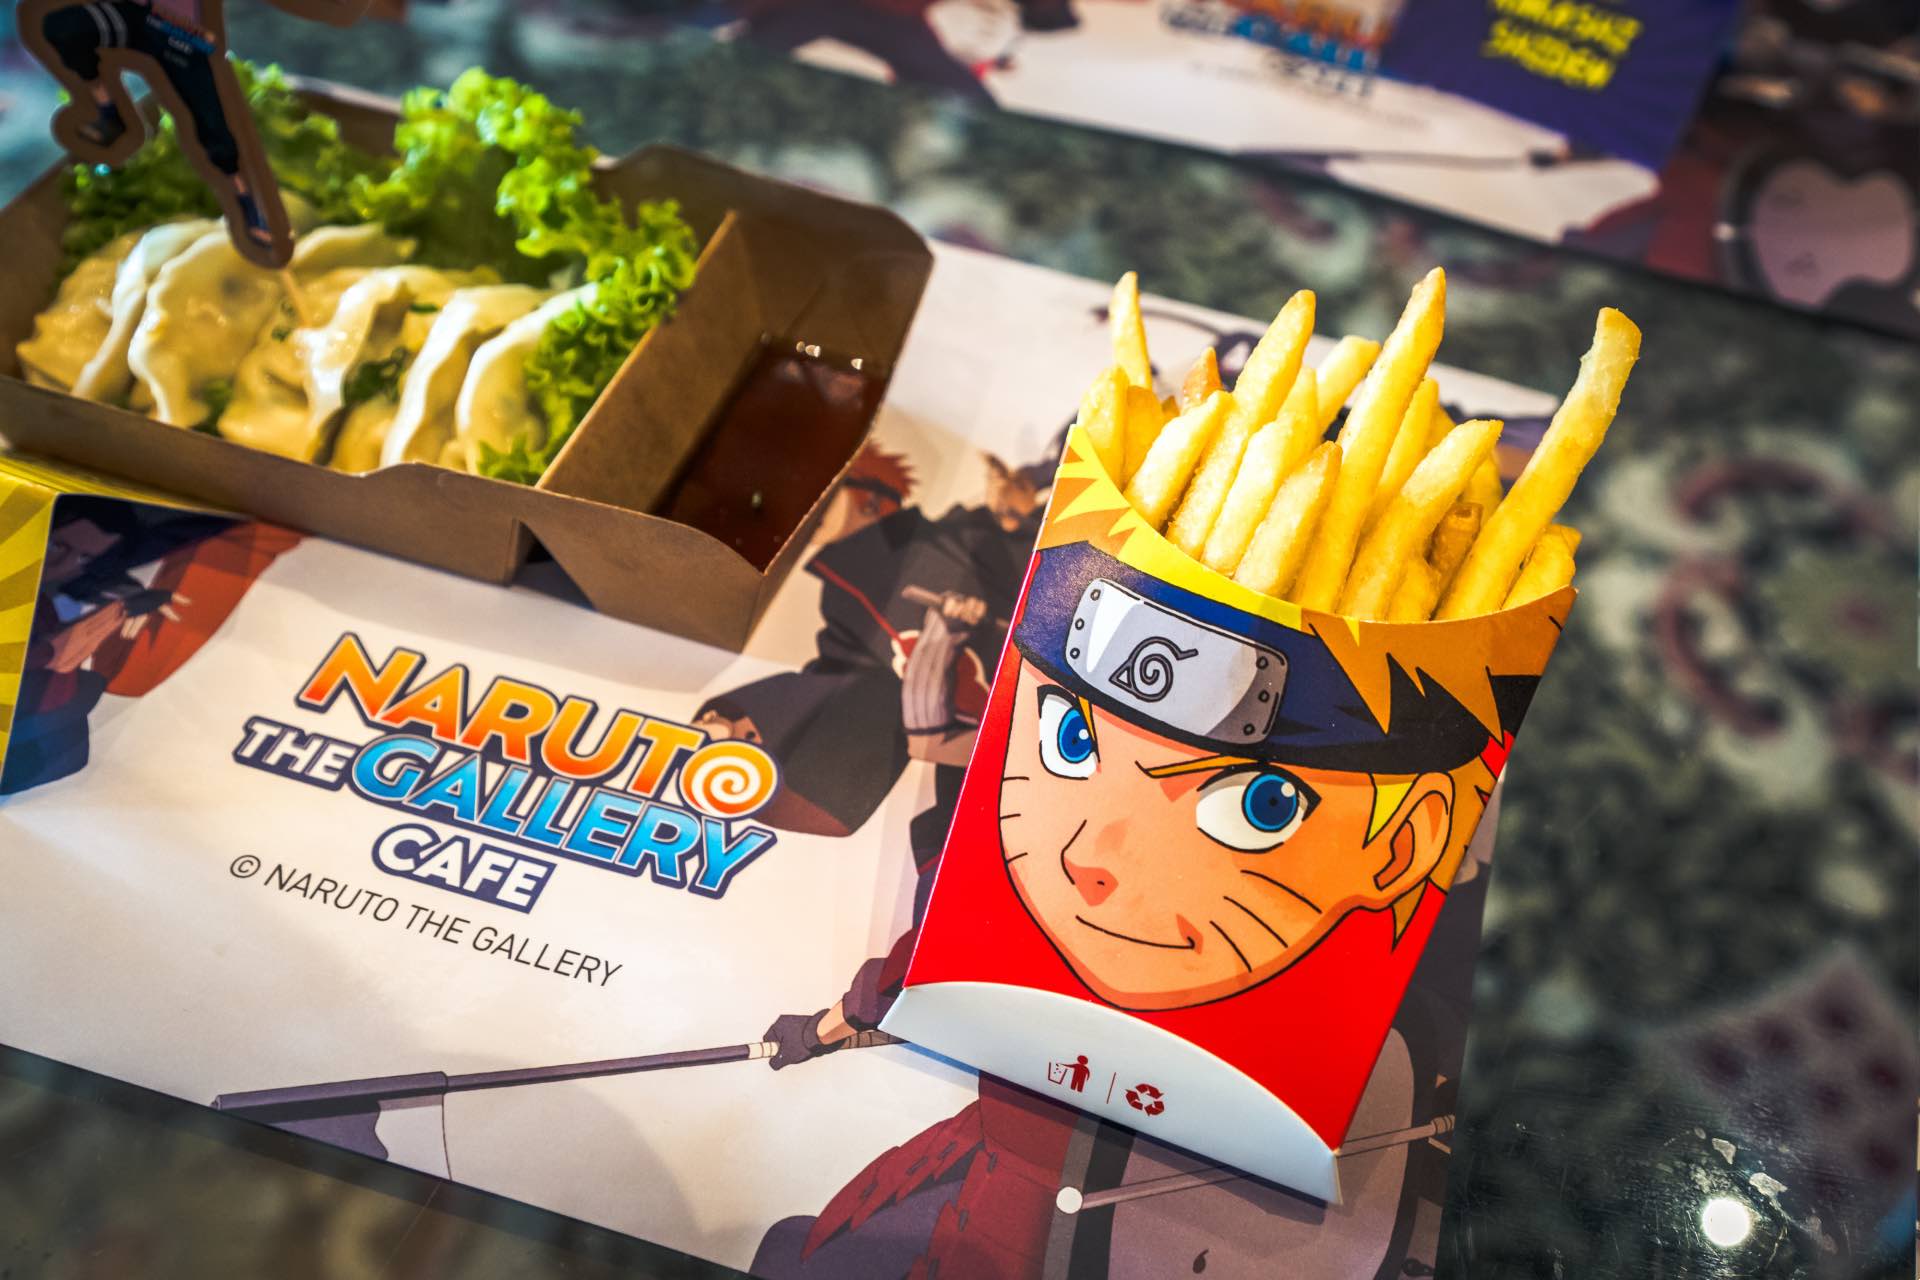 , ‘Naruto: The Gallery’ debuts at Universal Studios Singapore, with pop-up cafe and official merchandise